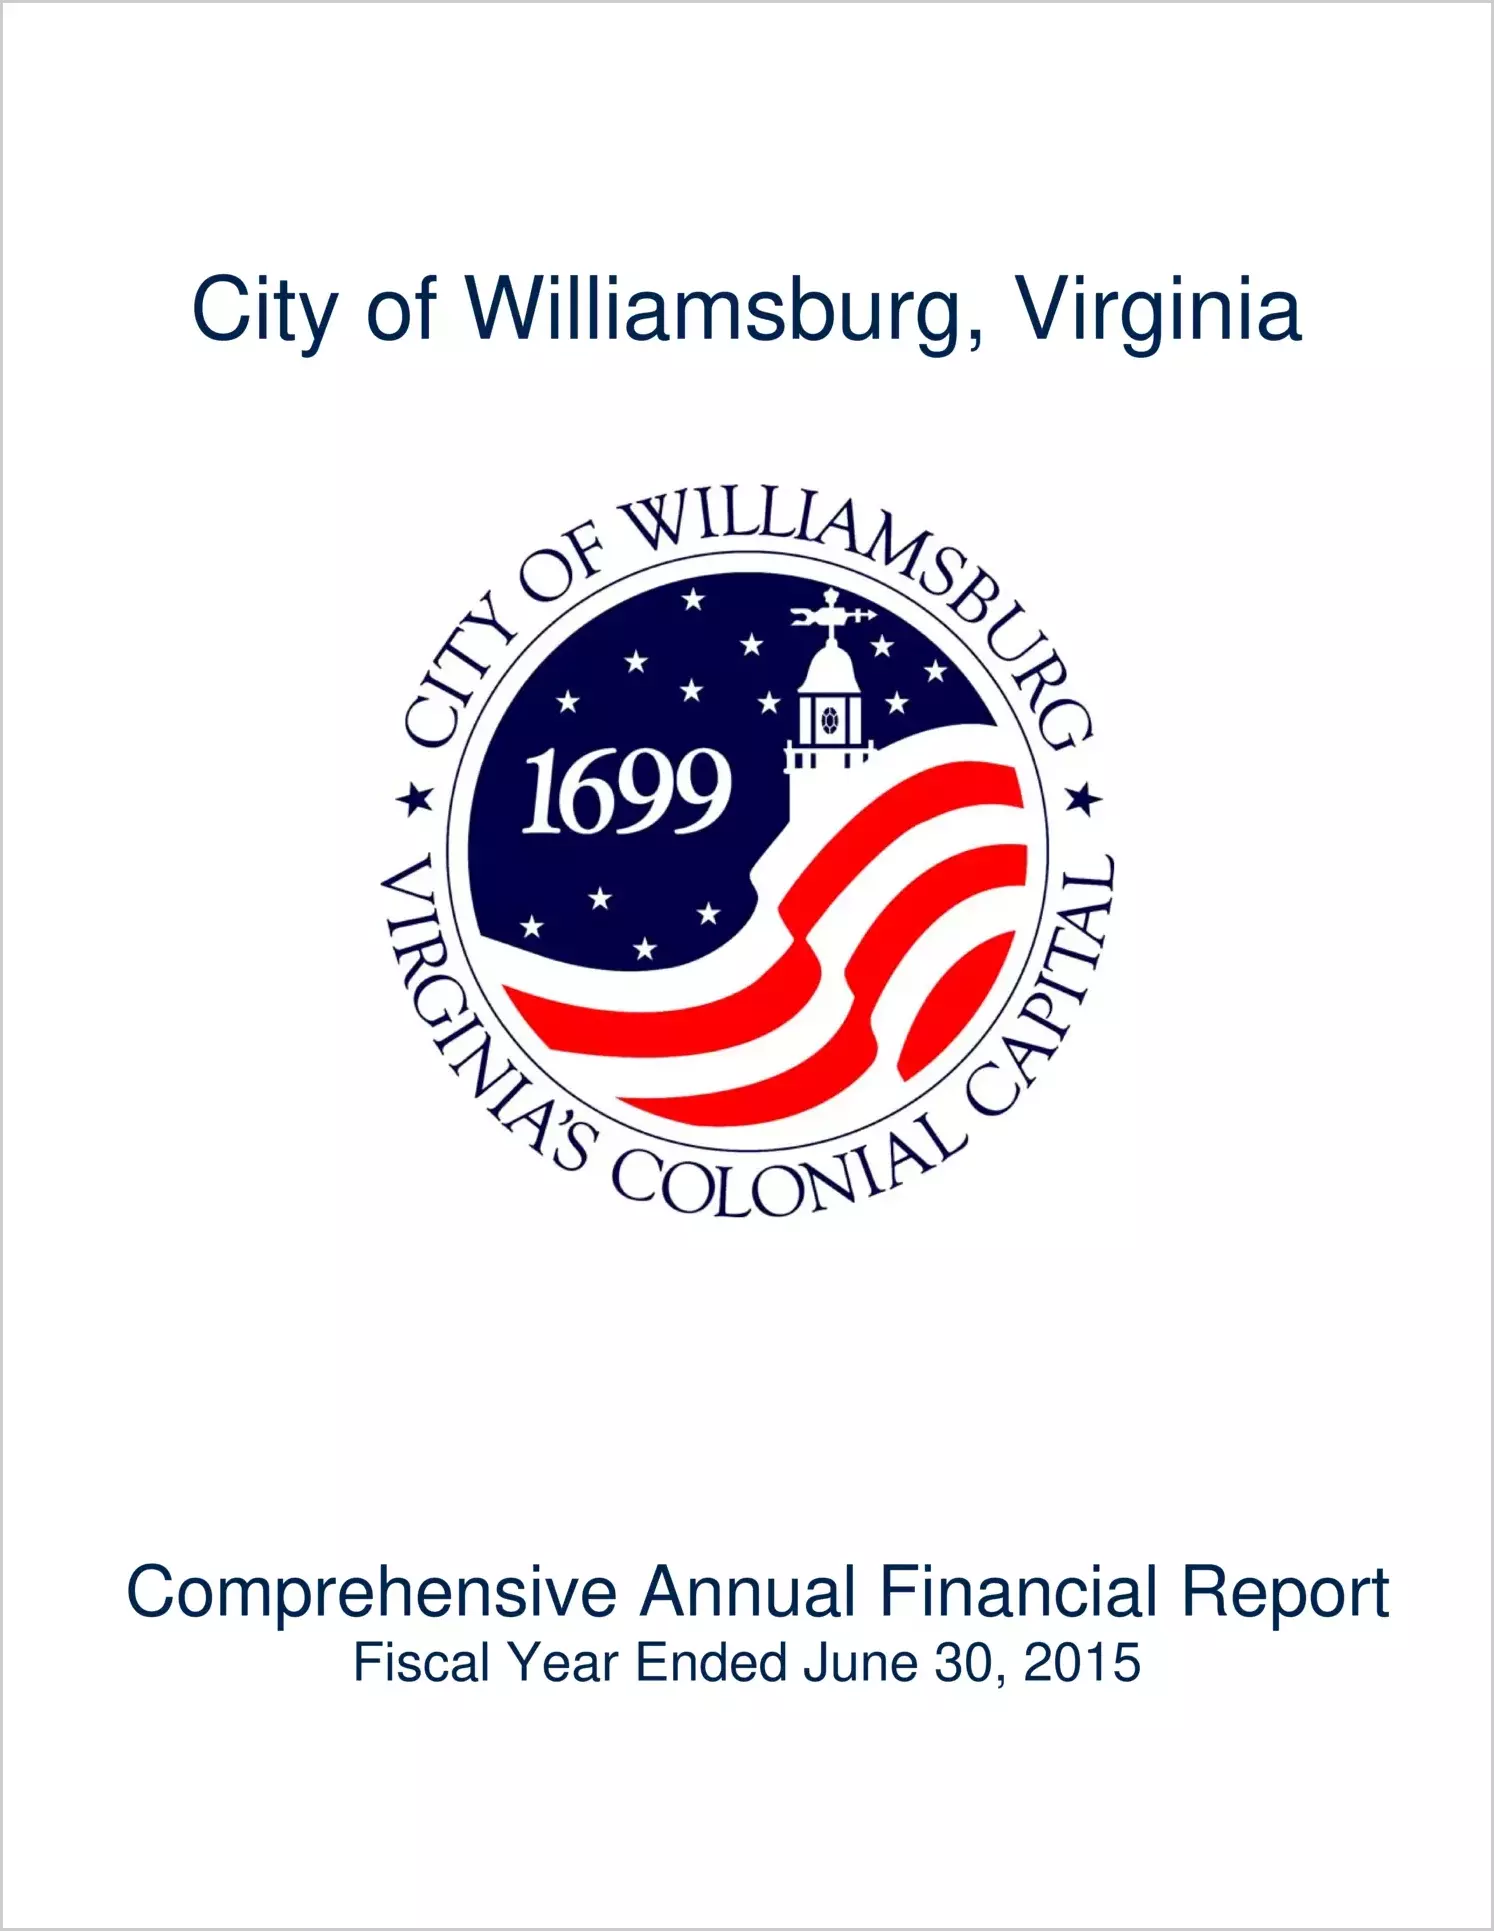 2015 Annual Financial Report for City of Williamsburg